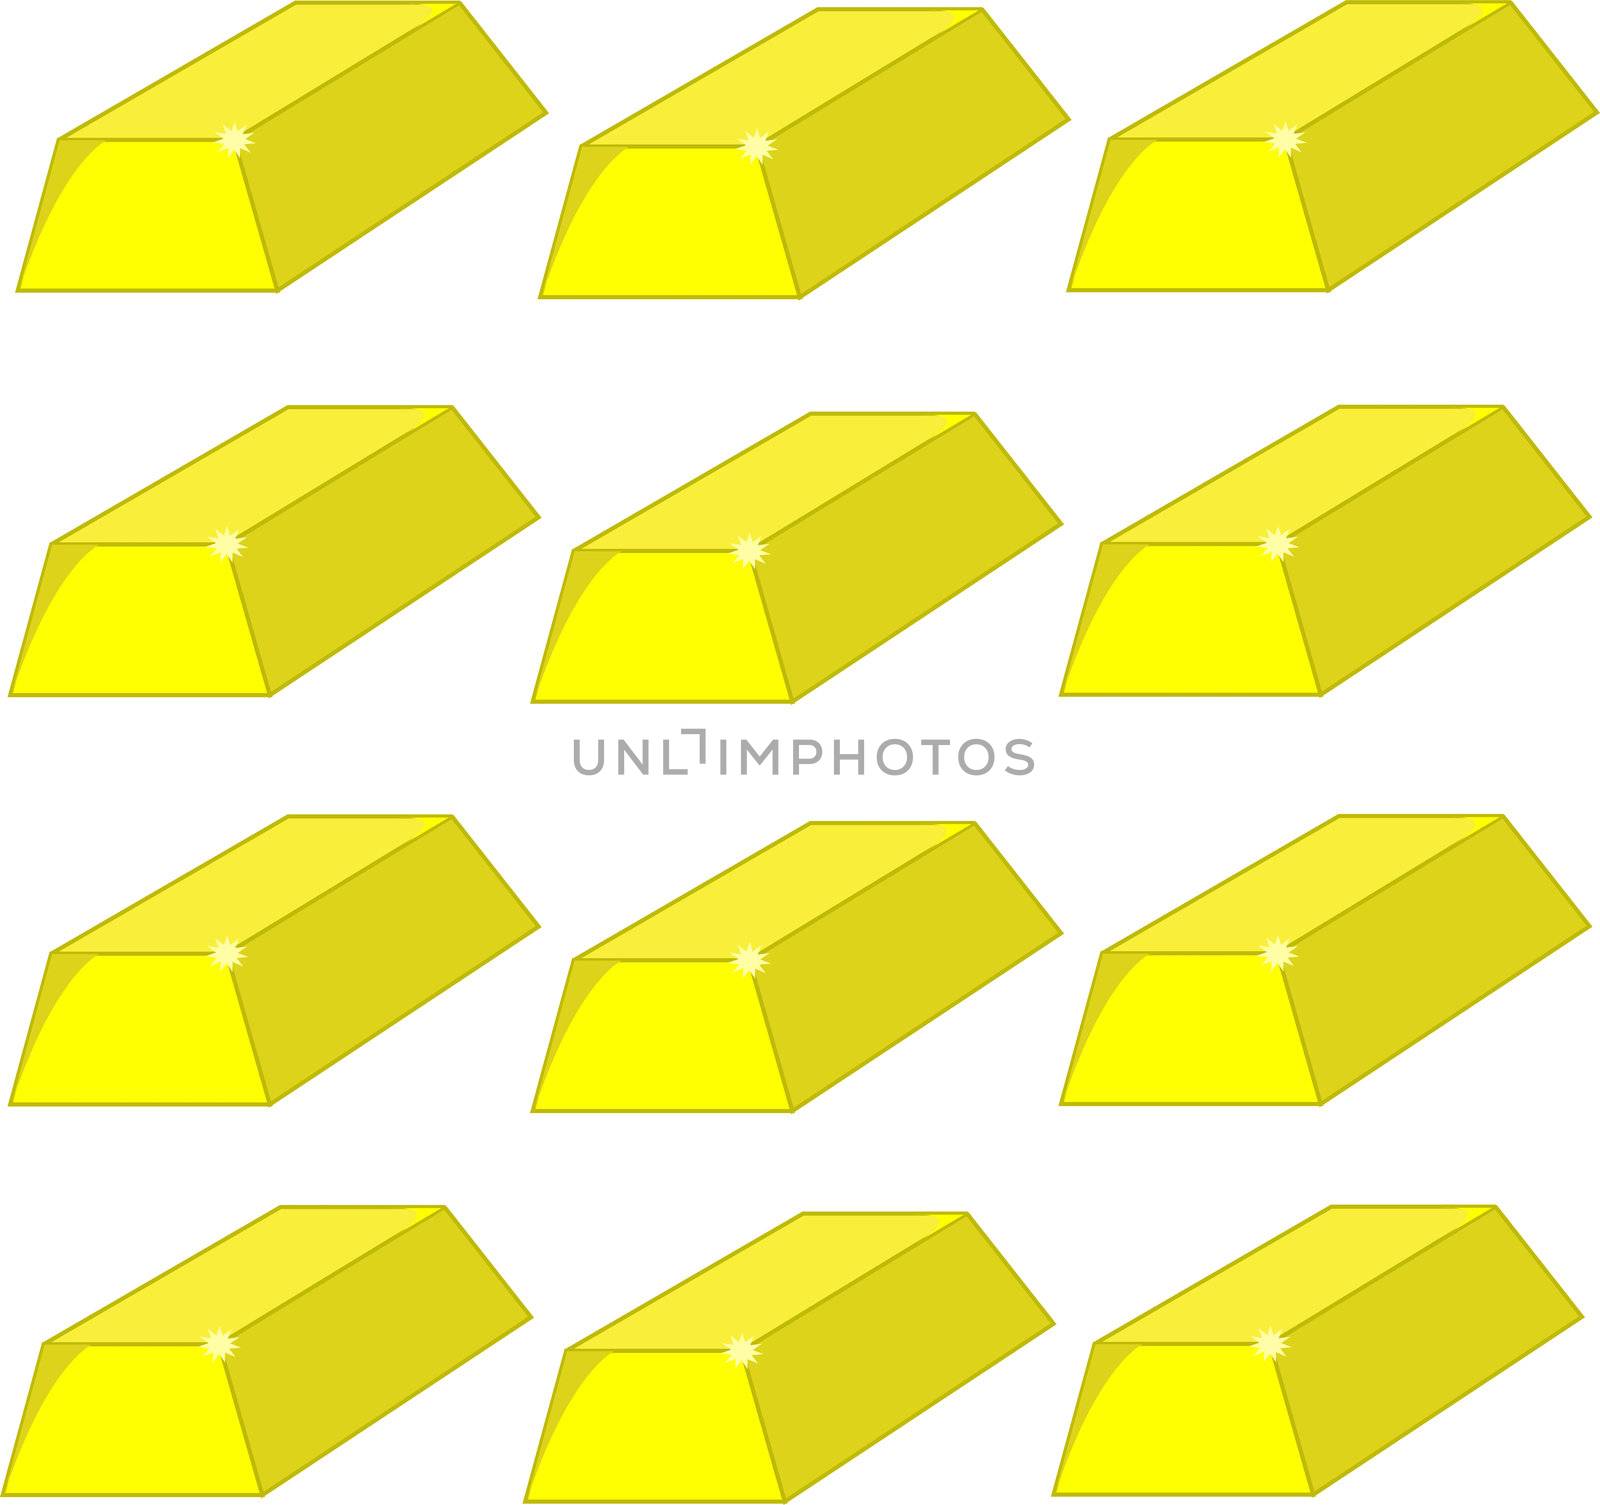 Many gold bars on a white background.